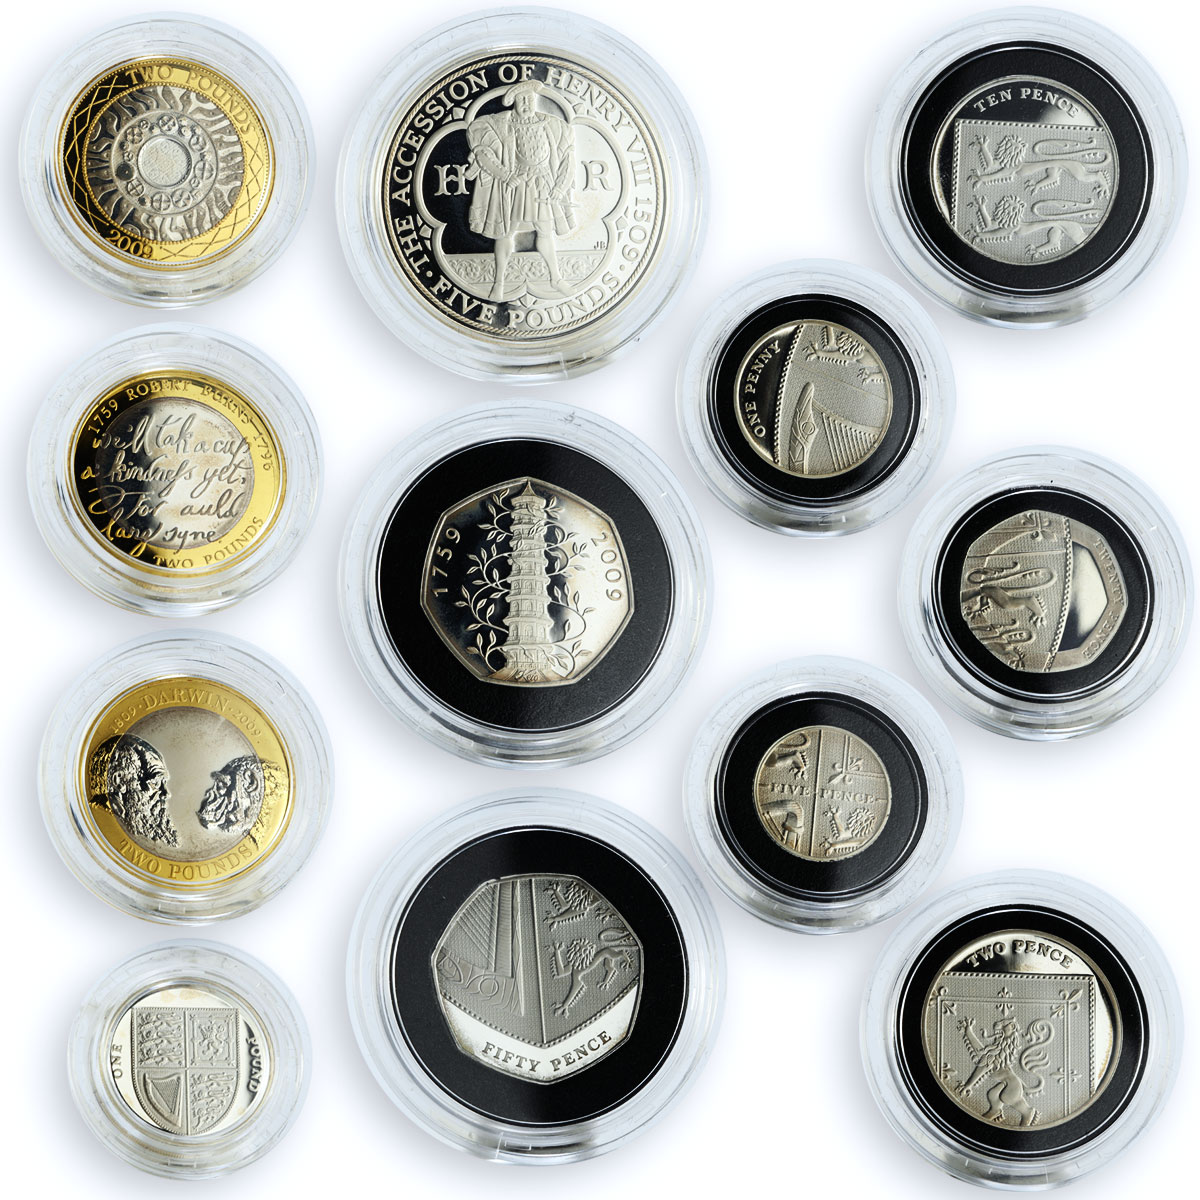 United Kingdom set of 12 coins The Royal Arms and Technology gilded silver 2009